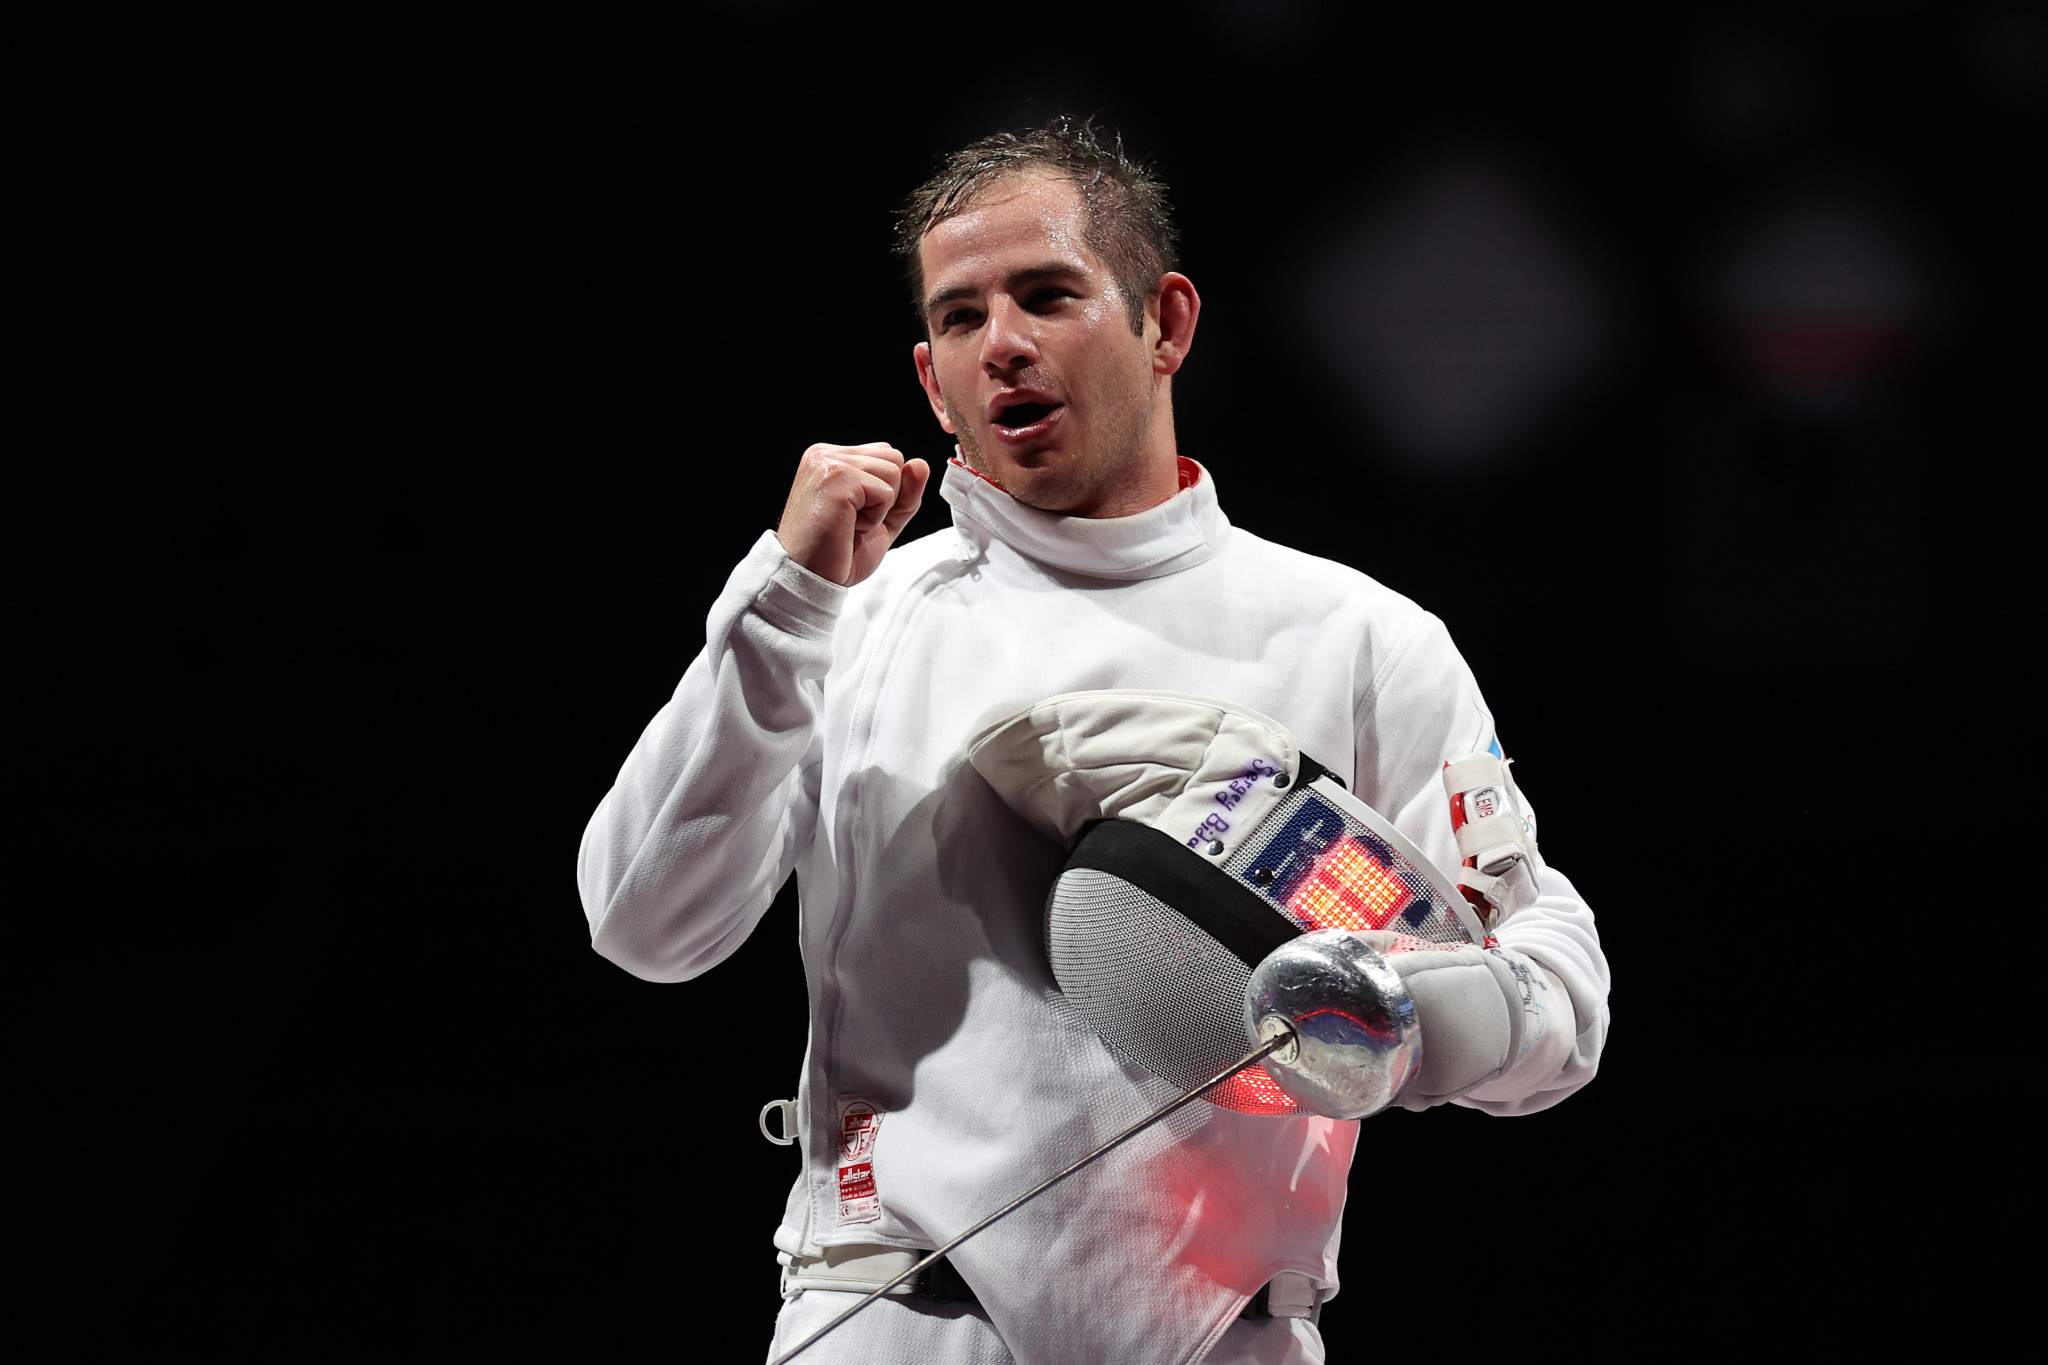 Russian fencing épée team coach fired after athletes move to US